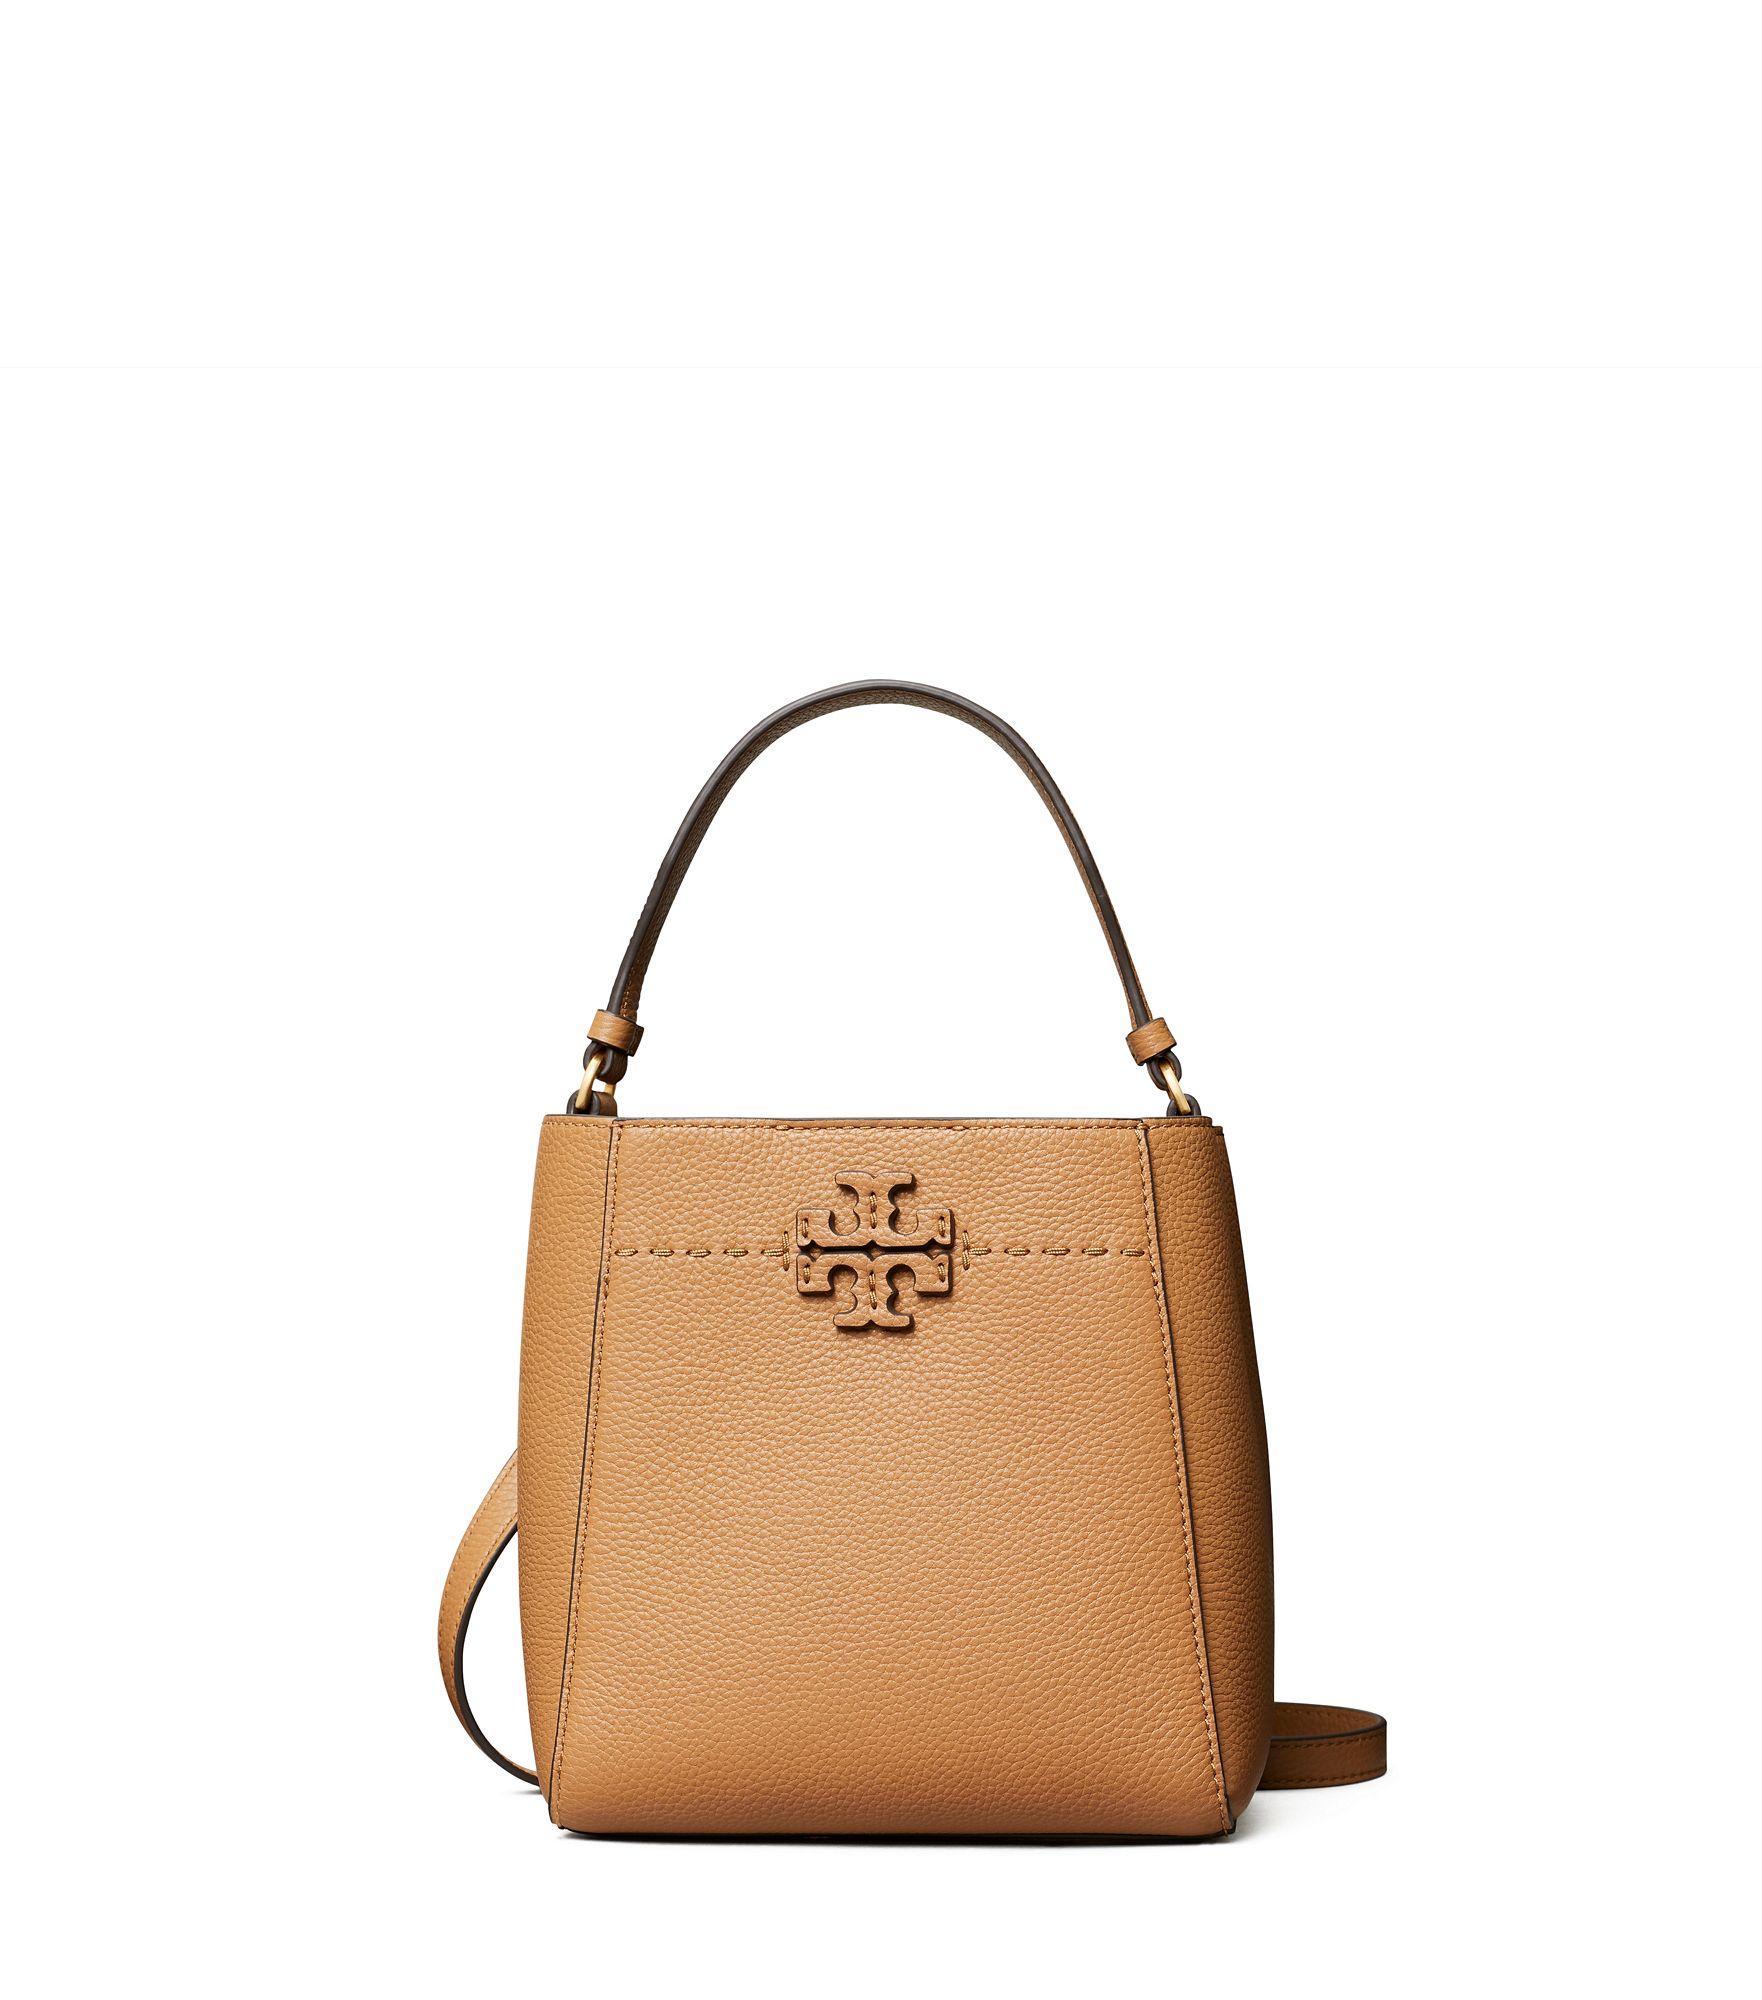 Tory Burch Leather Mcgraw Small Bucket Bag in Brown - Lyst